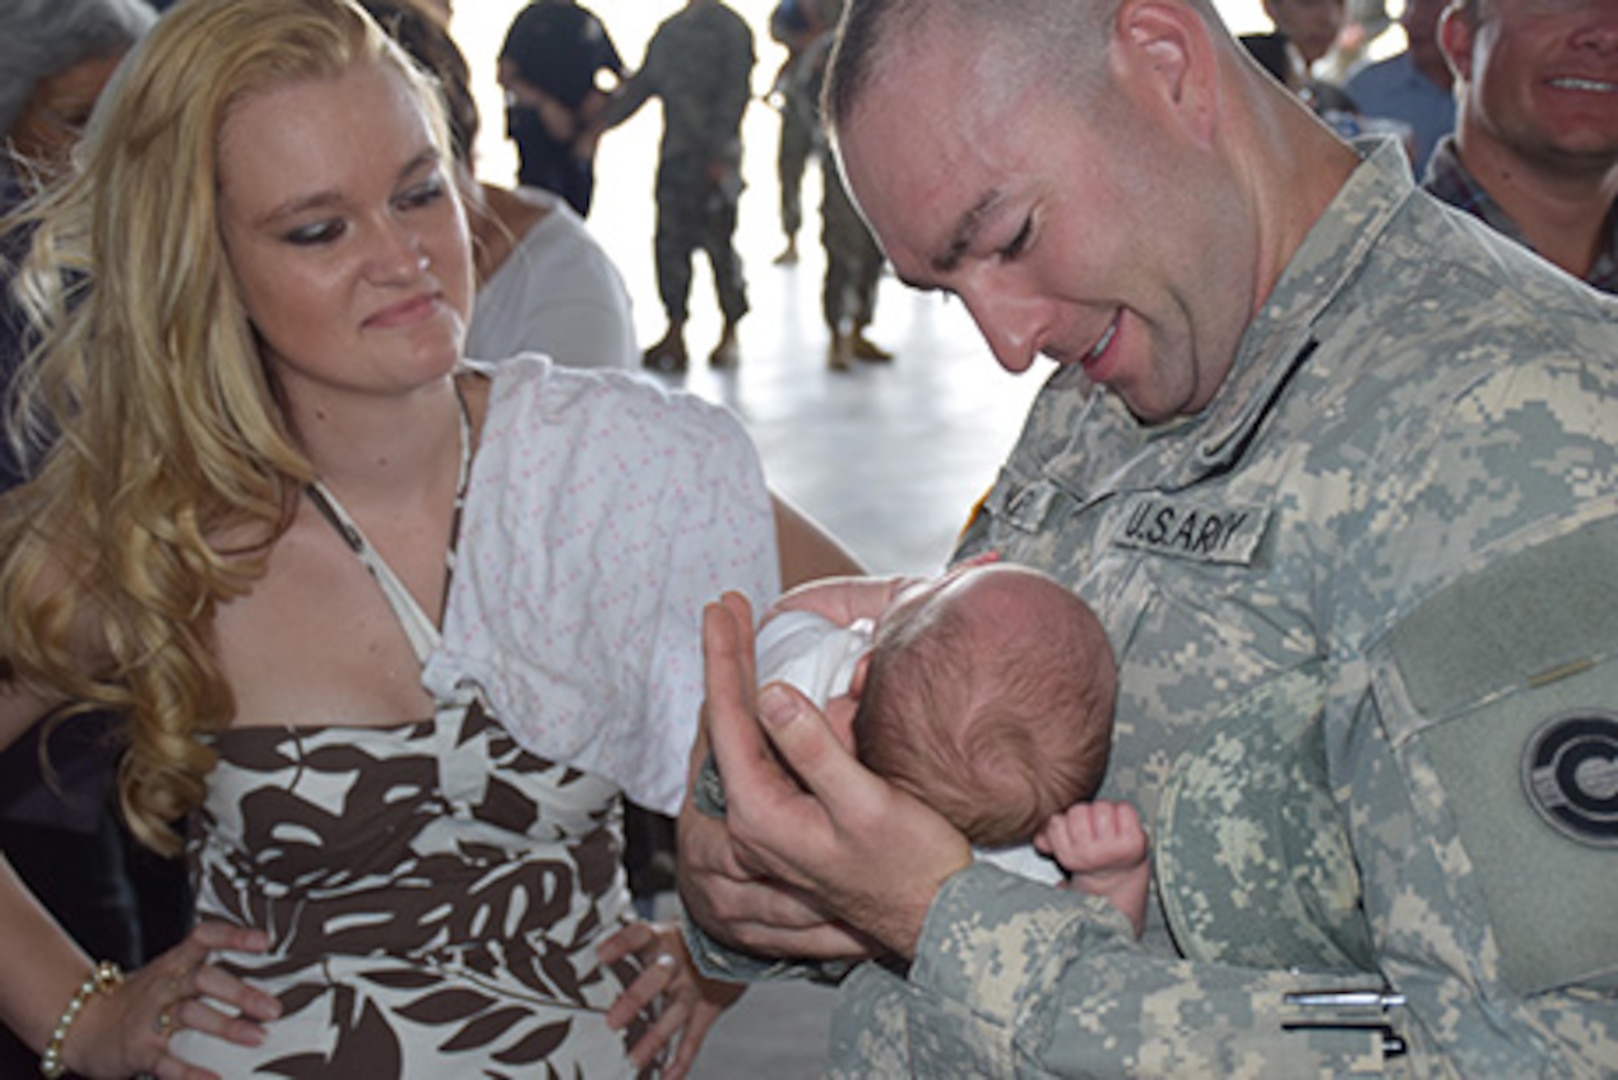 Members of the Colorado Army National Guard 193rd Military Police Battalion and 220th Military Police Company are met by family, friends and dignitaries for the units welcome home ceremony Sept. 5, 2015 at hanger 909, Buckley Air Force Base, Aurora, Color